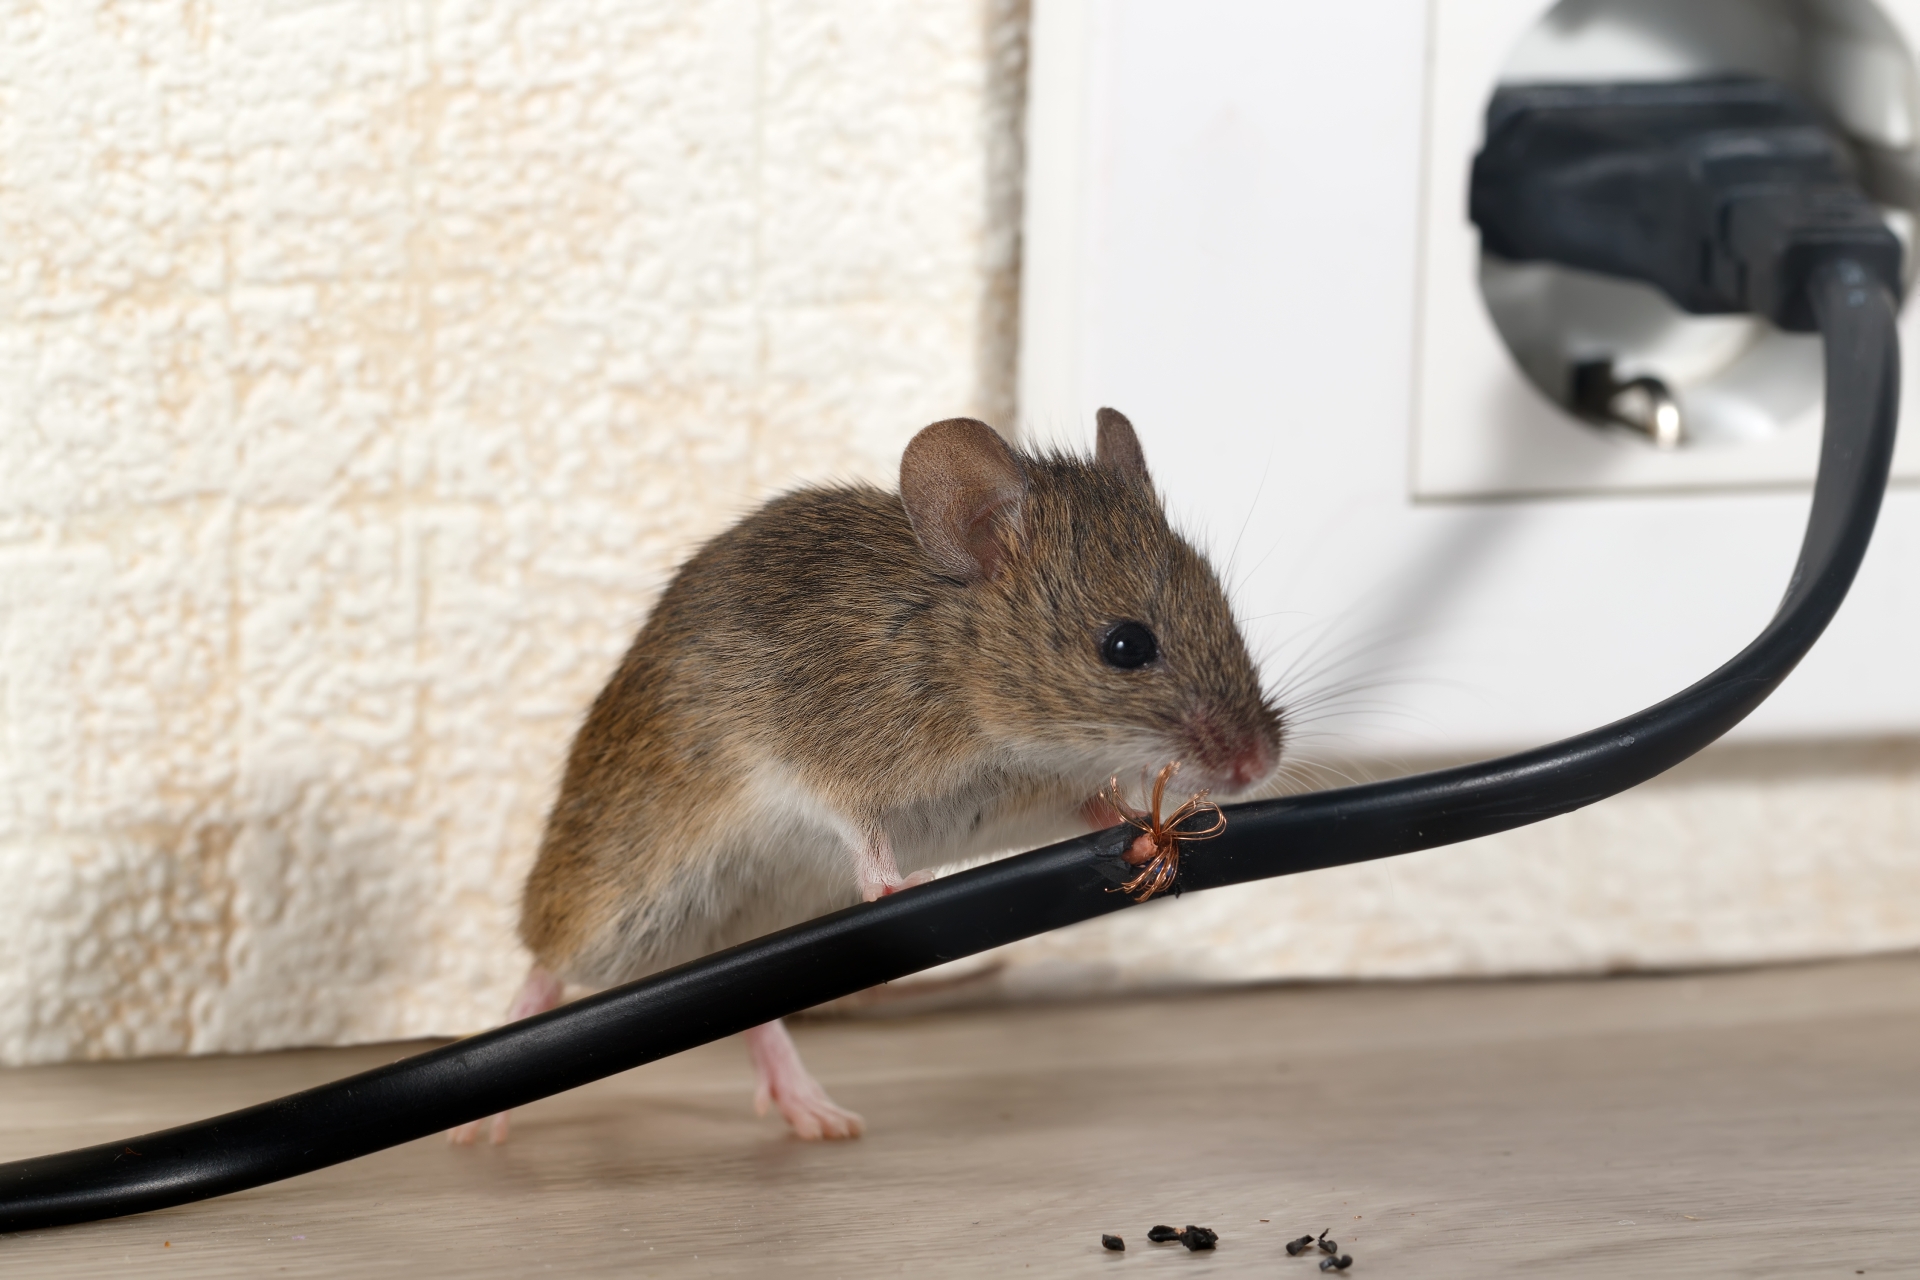 Mice Infestation, Pest Control in East Dulwich, SE22. Call Now 020 8166 9746